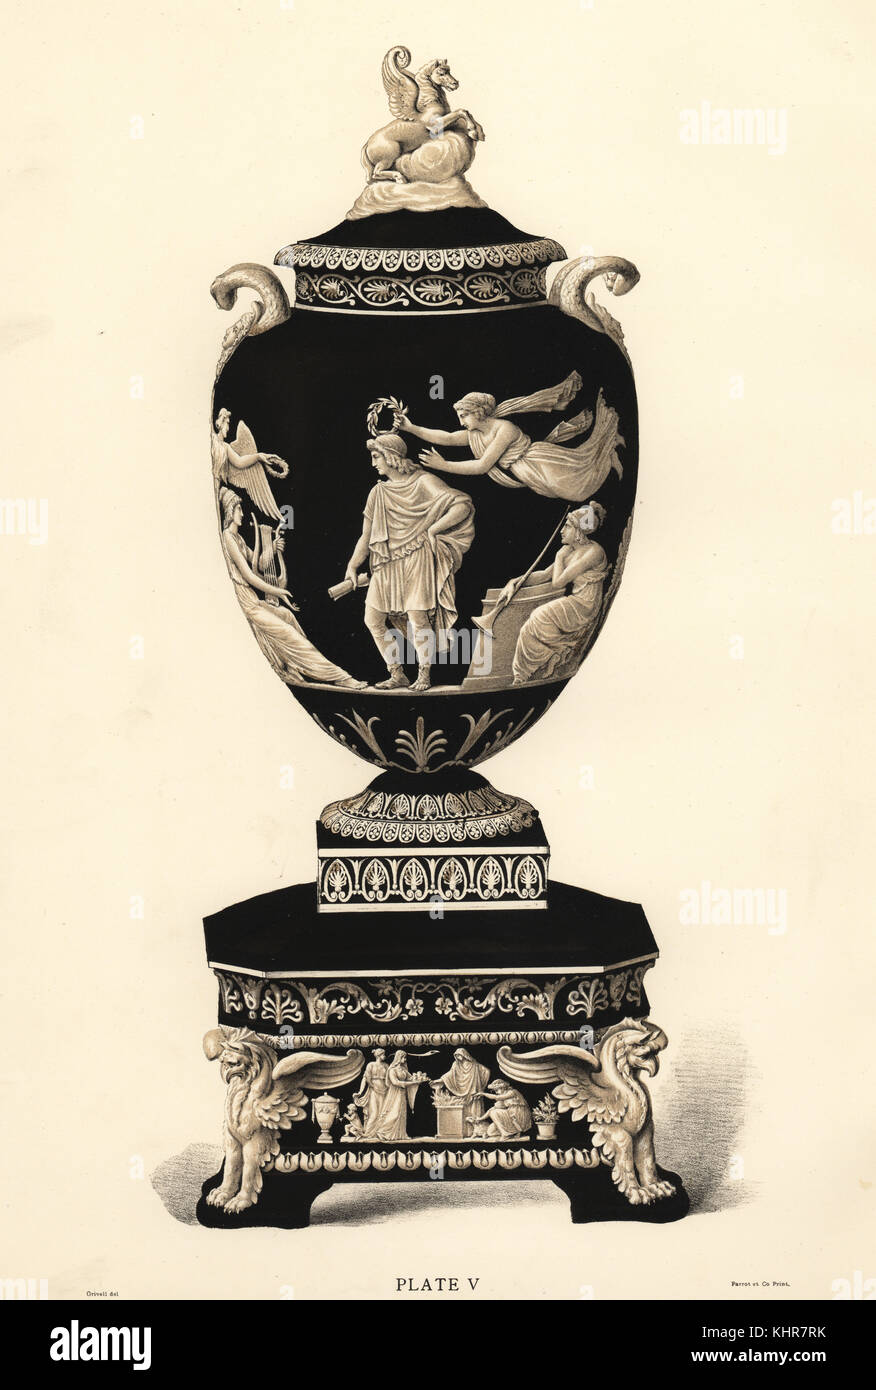 Large Homeric vase and pedestal. Chromolithograph drawn by Grivell and lithographed by Parrot et Co. from Frederick Rathbone's Old Wedgwood, the Decorative or Artistic Ceramic Work Produced by Josiah Wedgwood, Quaritch, London, 1898. Stock Photo